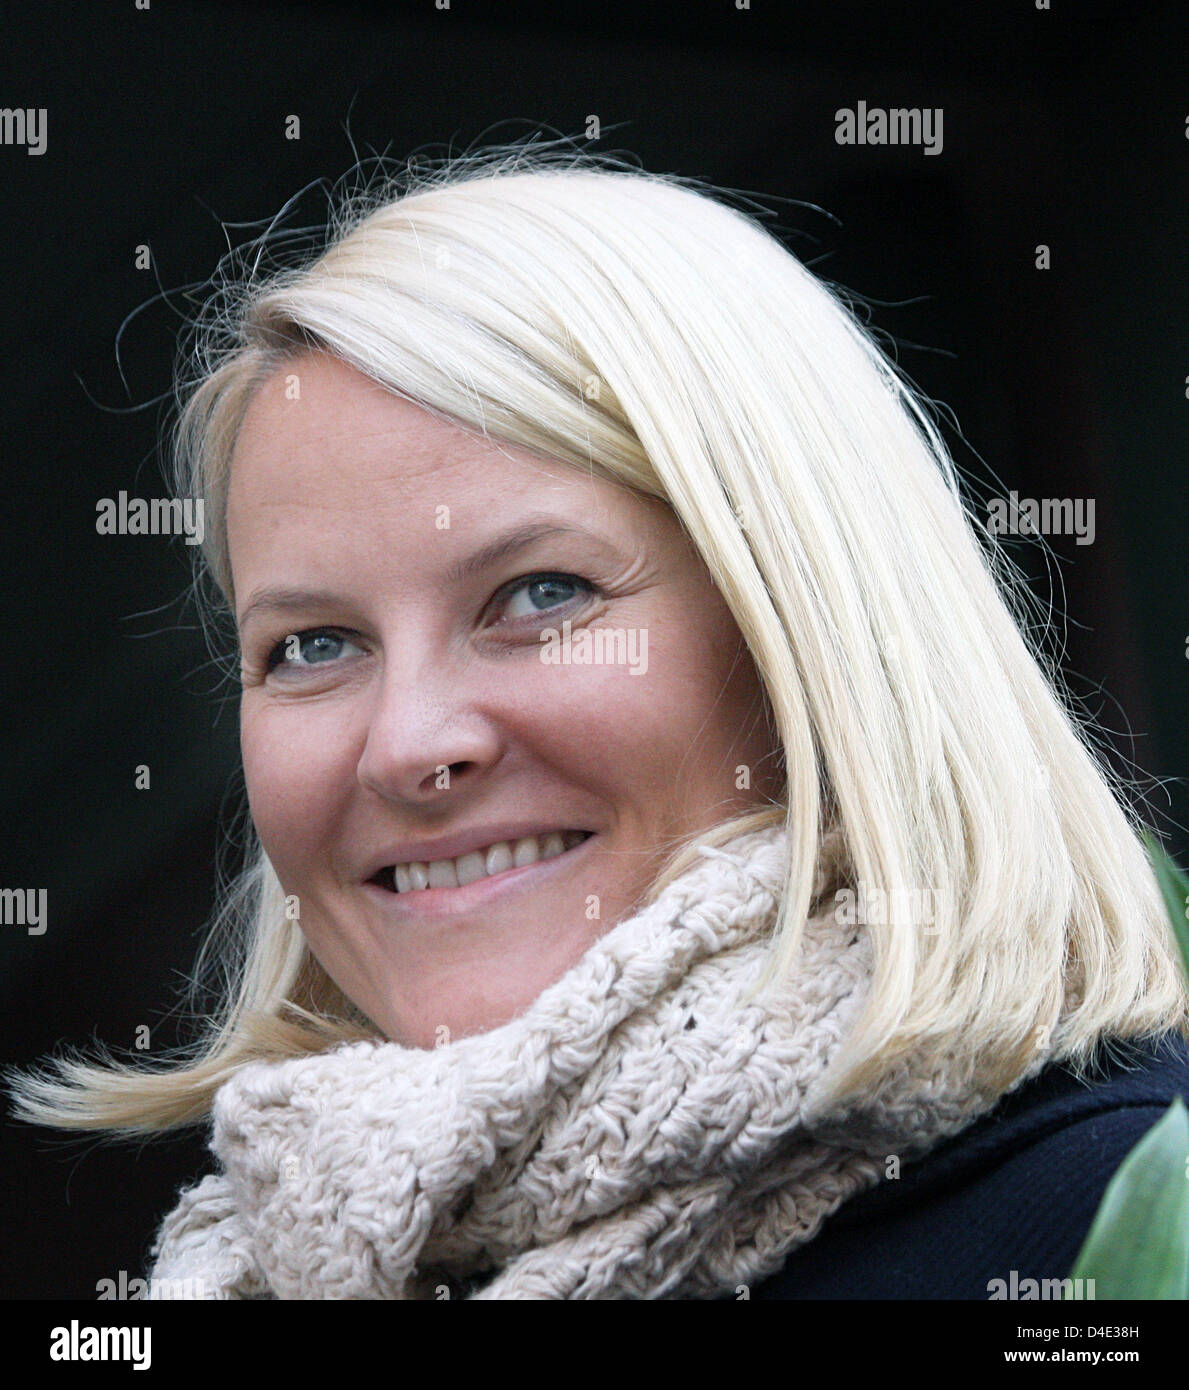 Princess Mette-Marit of Norway visits the Telemark region town Kragero Norway, 09 October 2008.  The Crown Prince Couple is on a three-day tour through the country. Photo: Albert Nieboer (NETHERLANDS OUT) Stock Photo